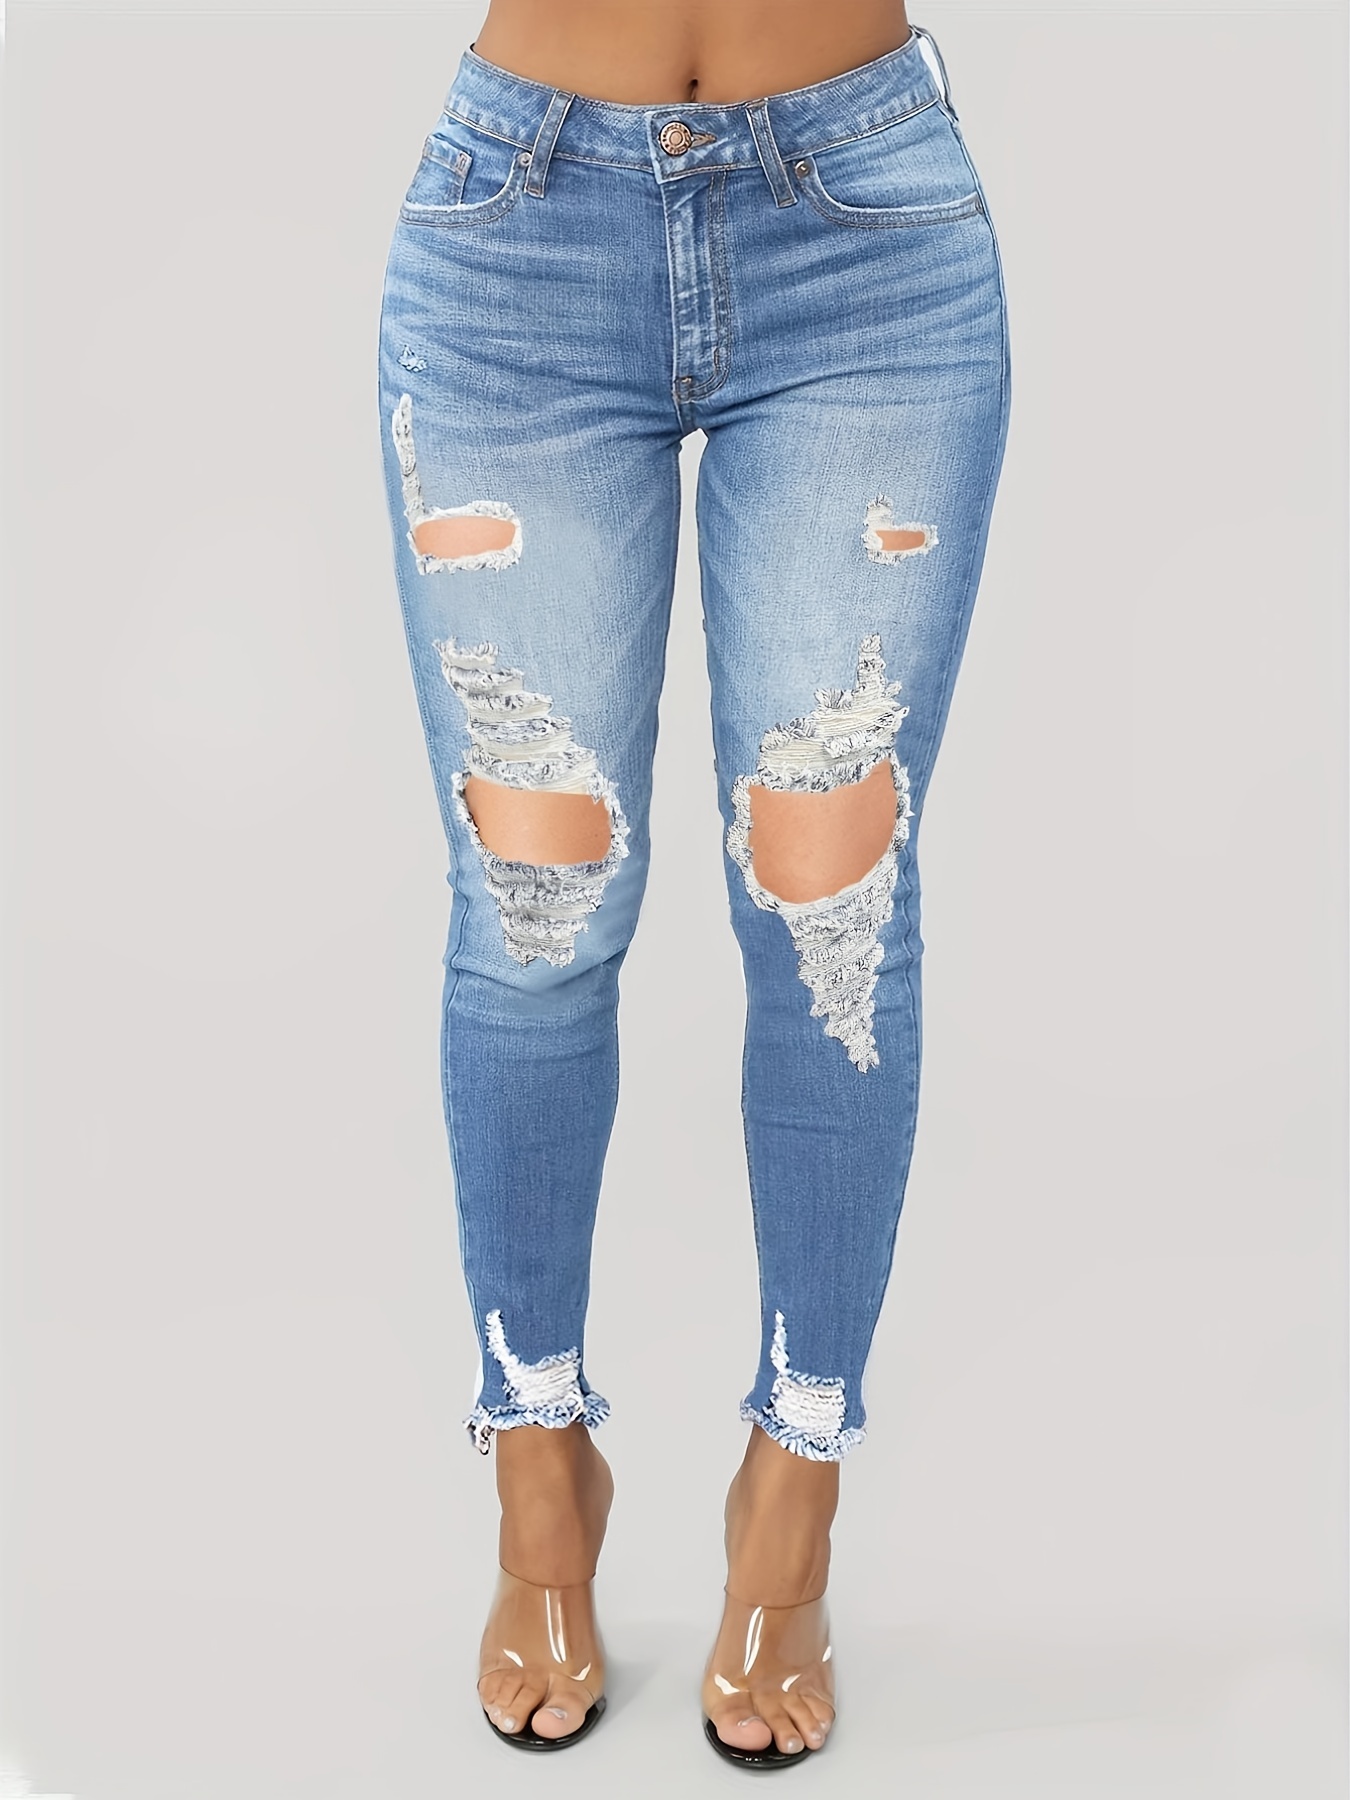 Jeans Pants Women Ripped Jeans with Holes Low Waisted Stretch